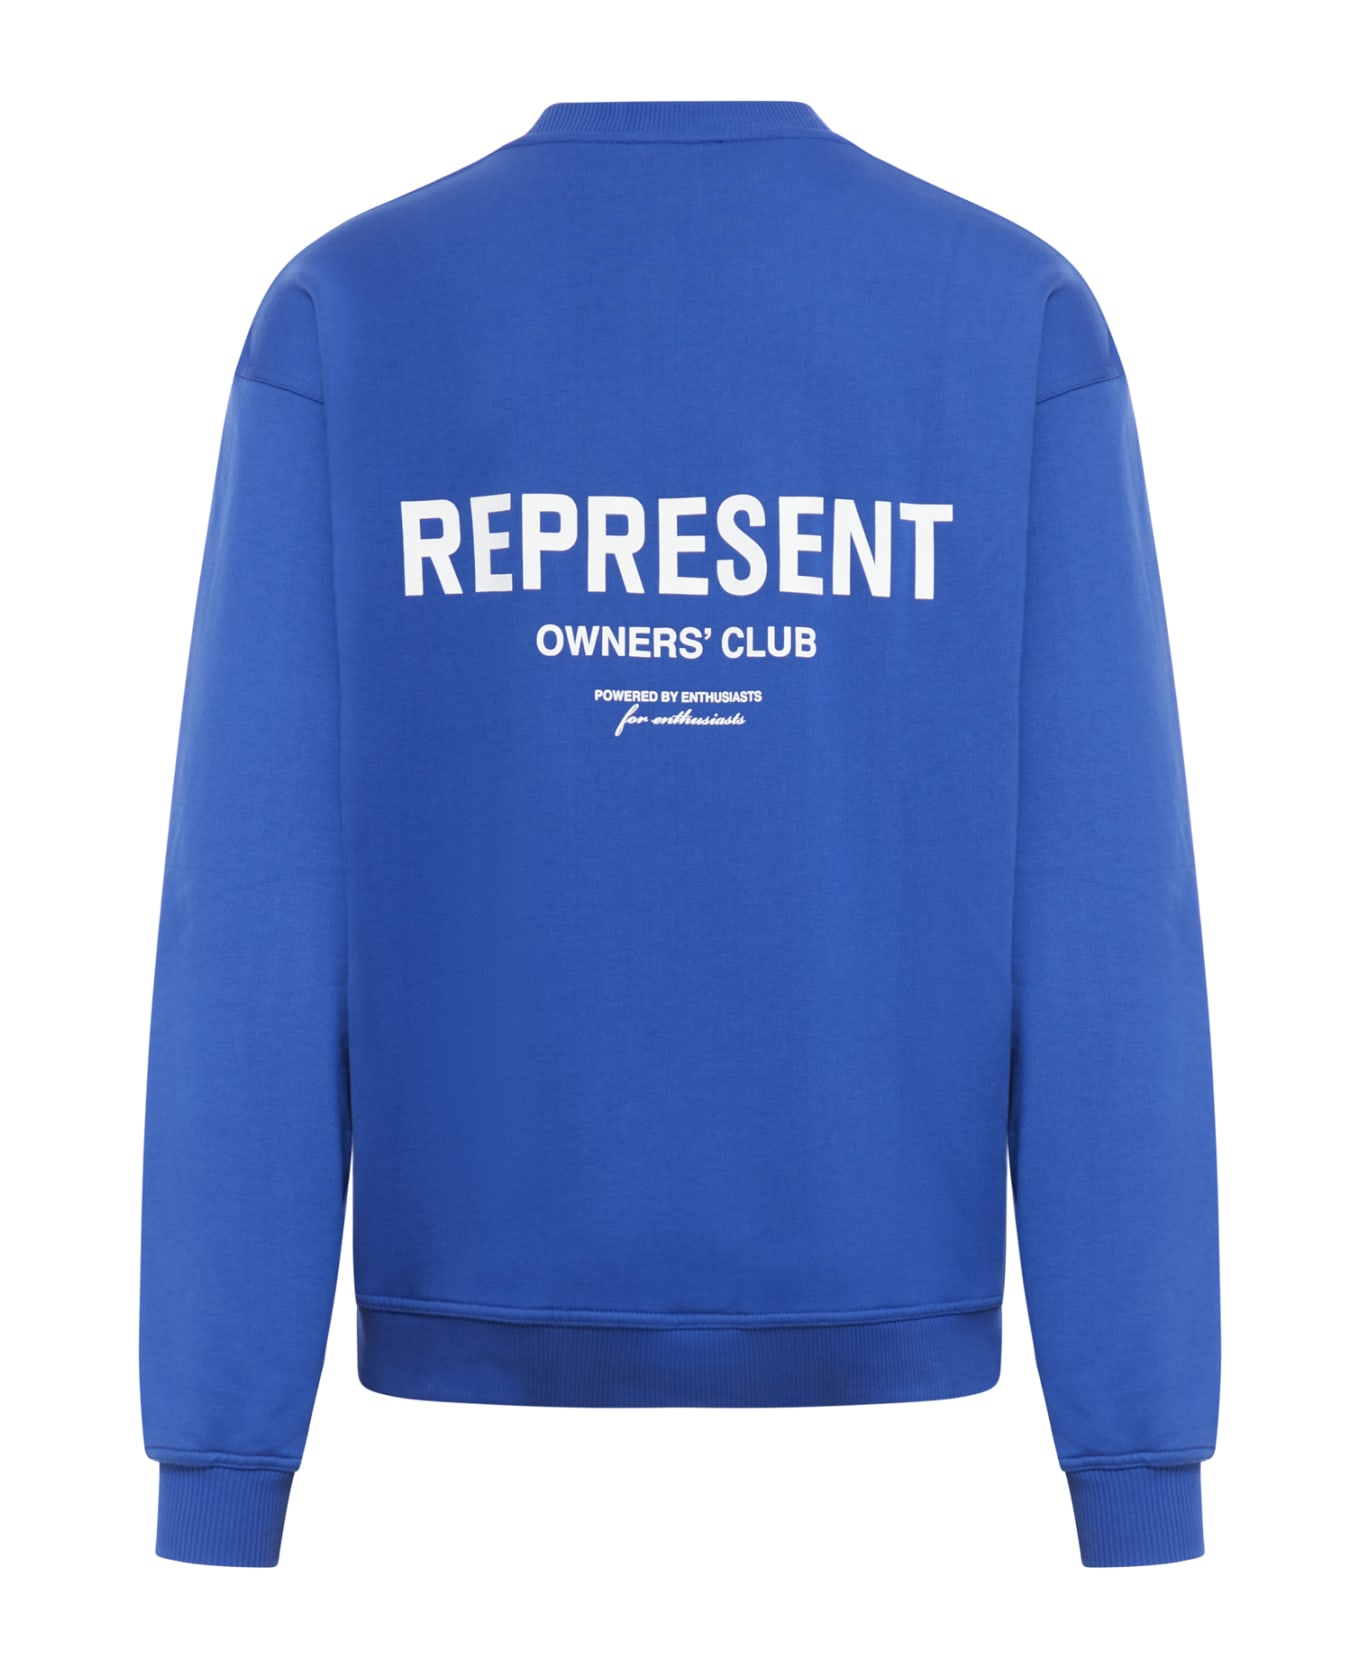 REPRESENT Owners Club Sweater - Cobalt Blue